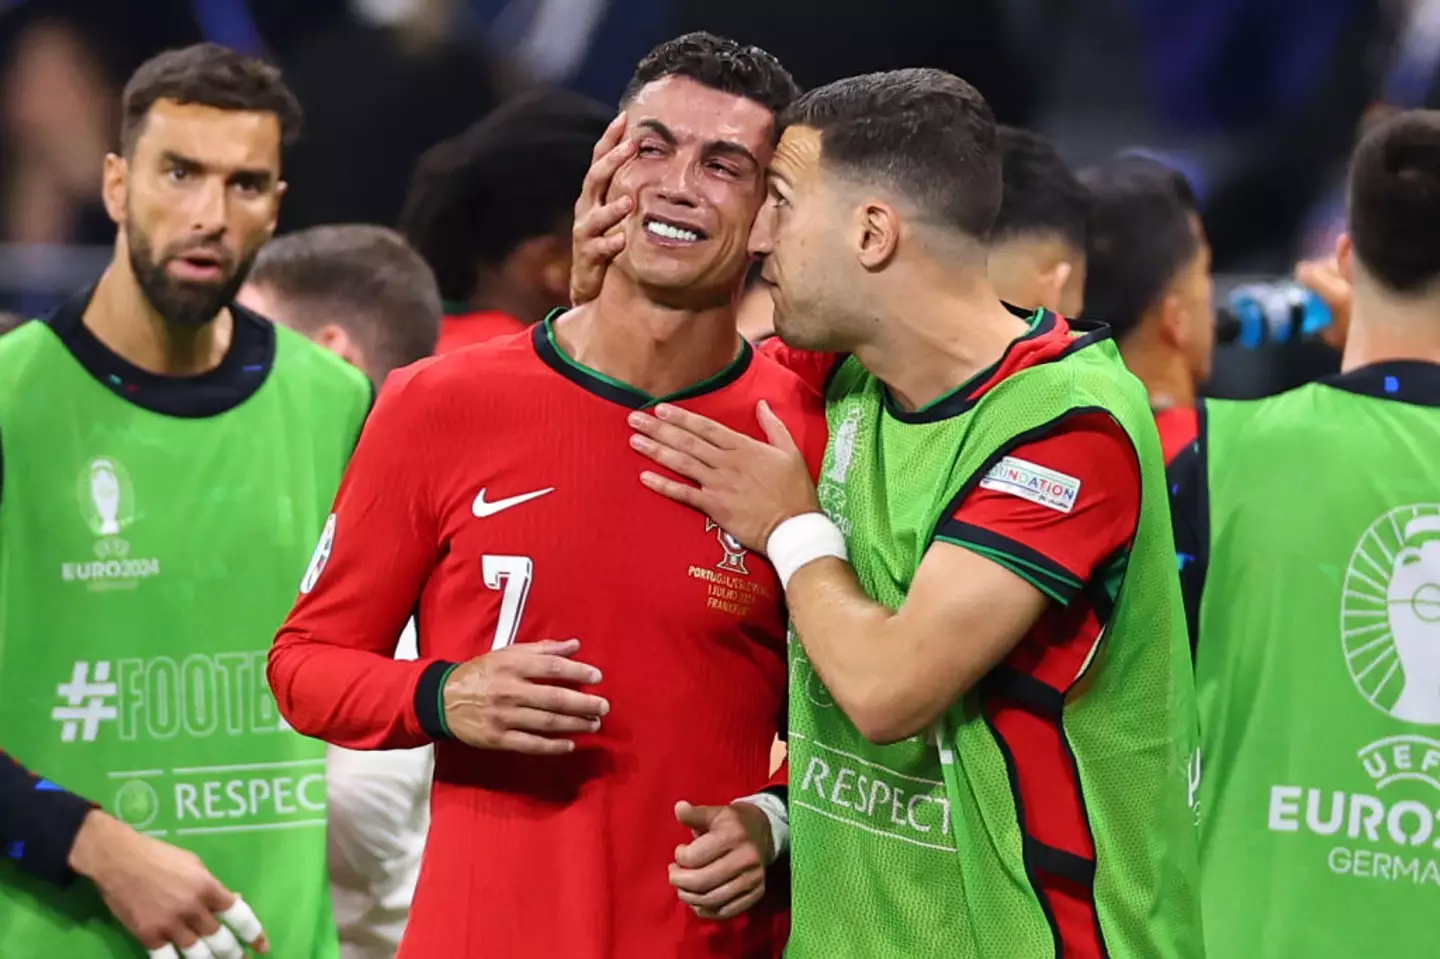 Cristiano Ronaldo couldn't hold back the tears after missing a penalty in the 105th minute that could have sealed their Euro 2024 progression. (Image: Getty)